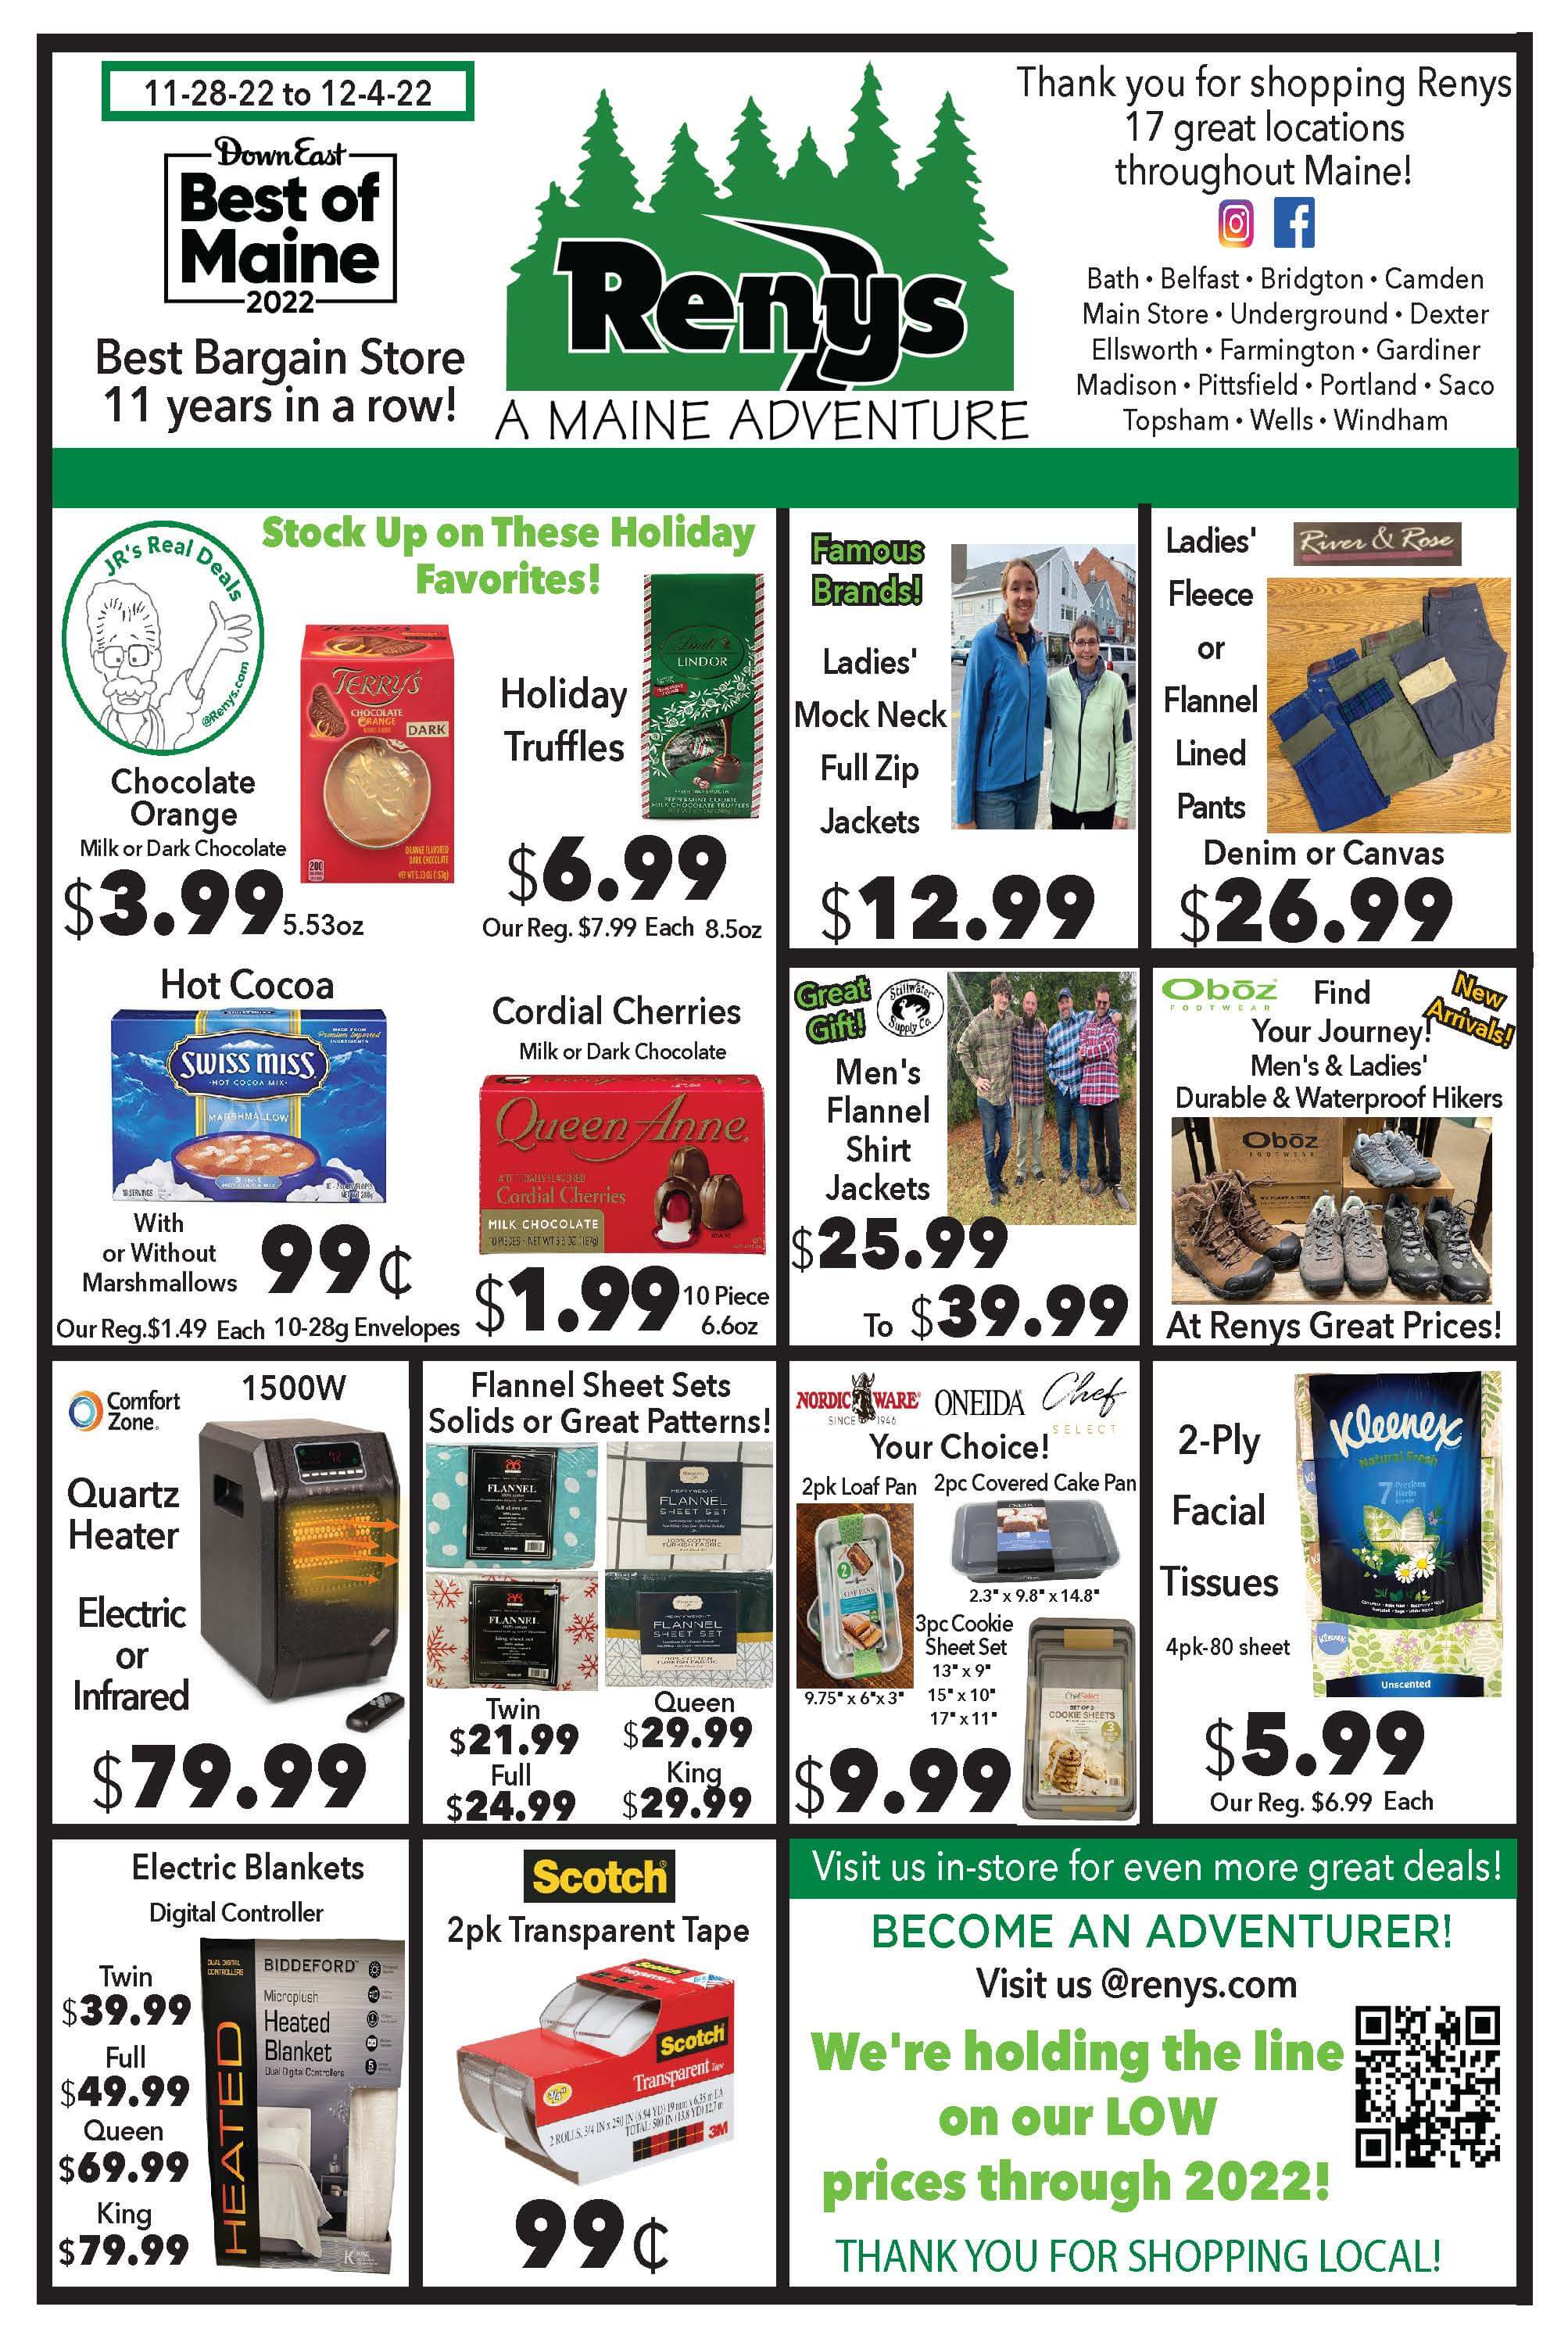 11/28/22 - 12/4/22 Weekly Flyer